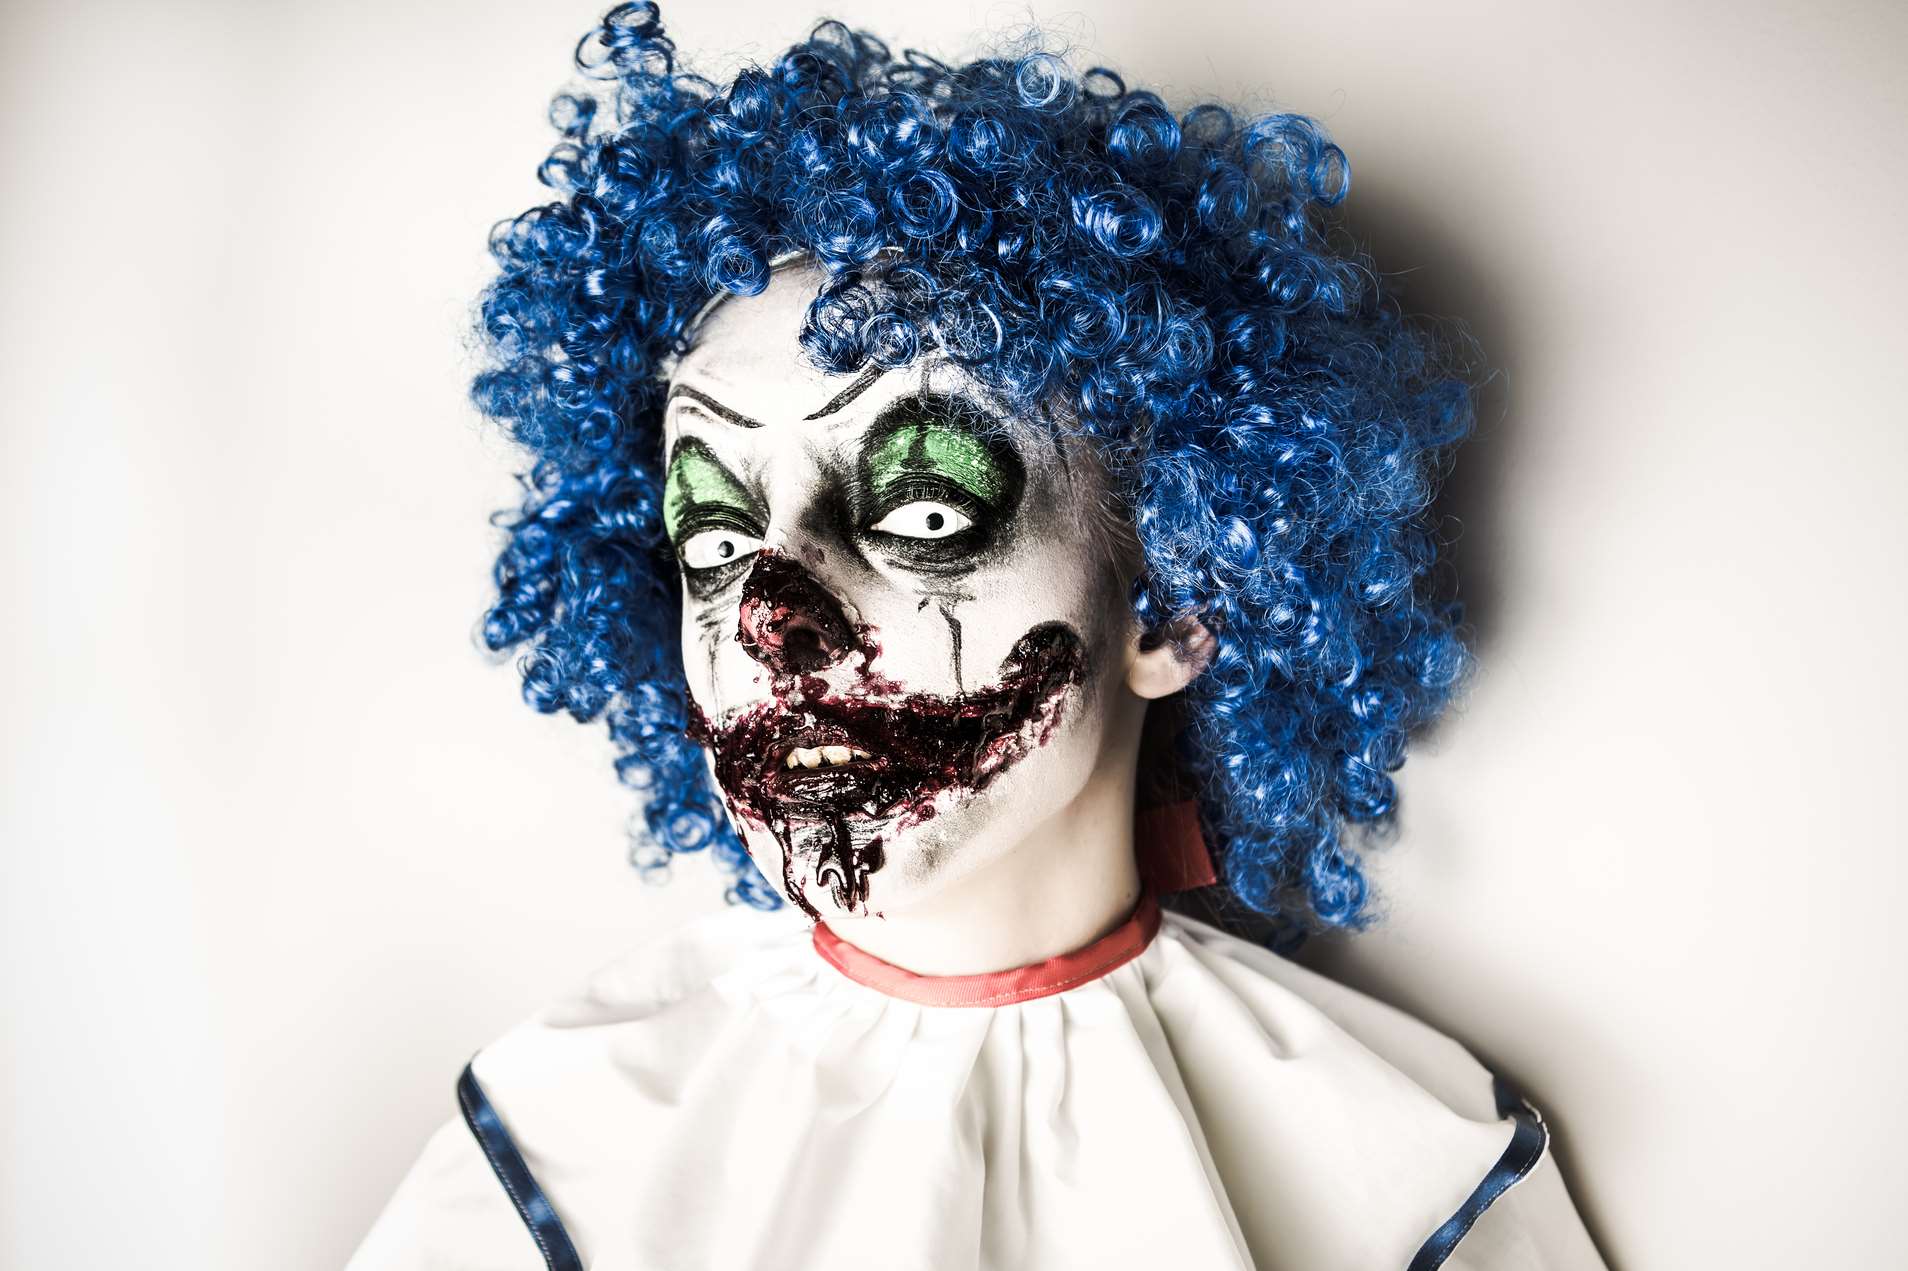 Sinister clown appearances shocked victims